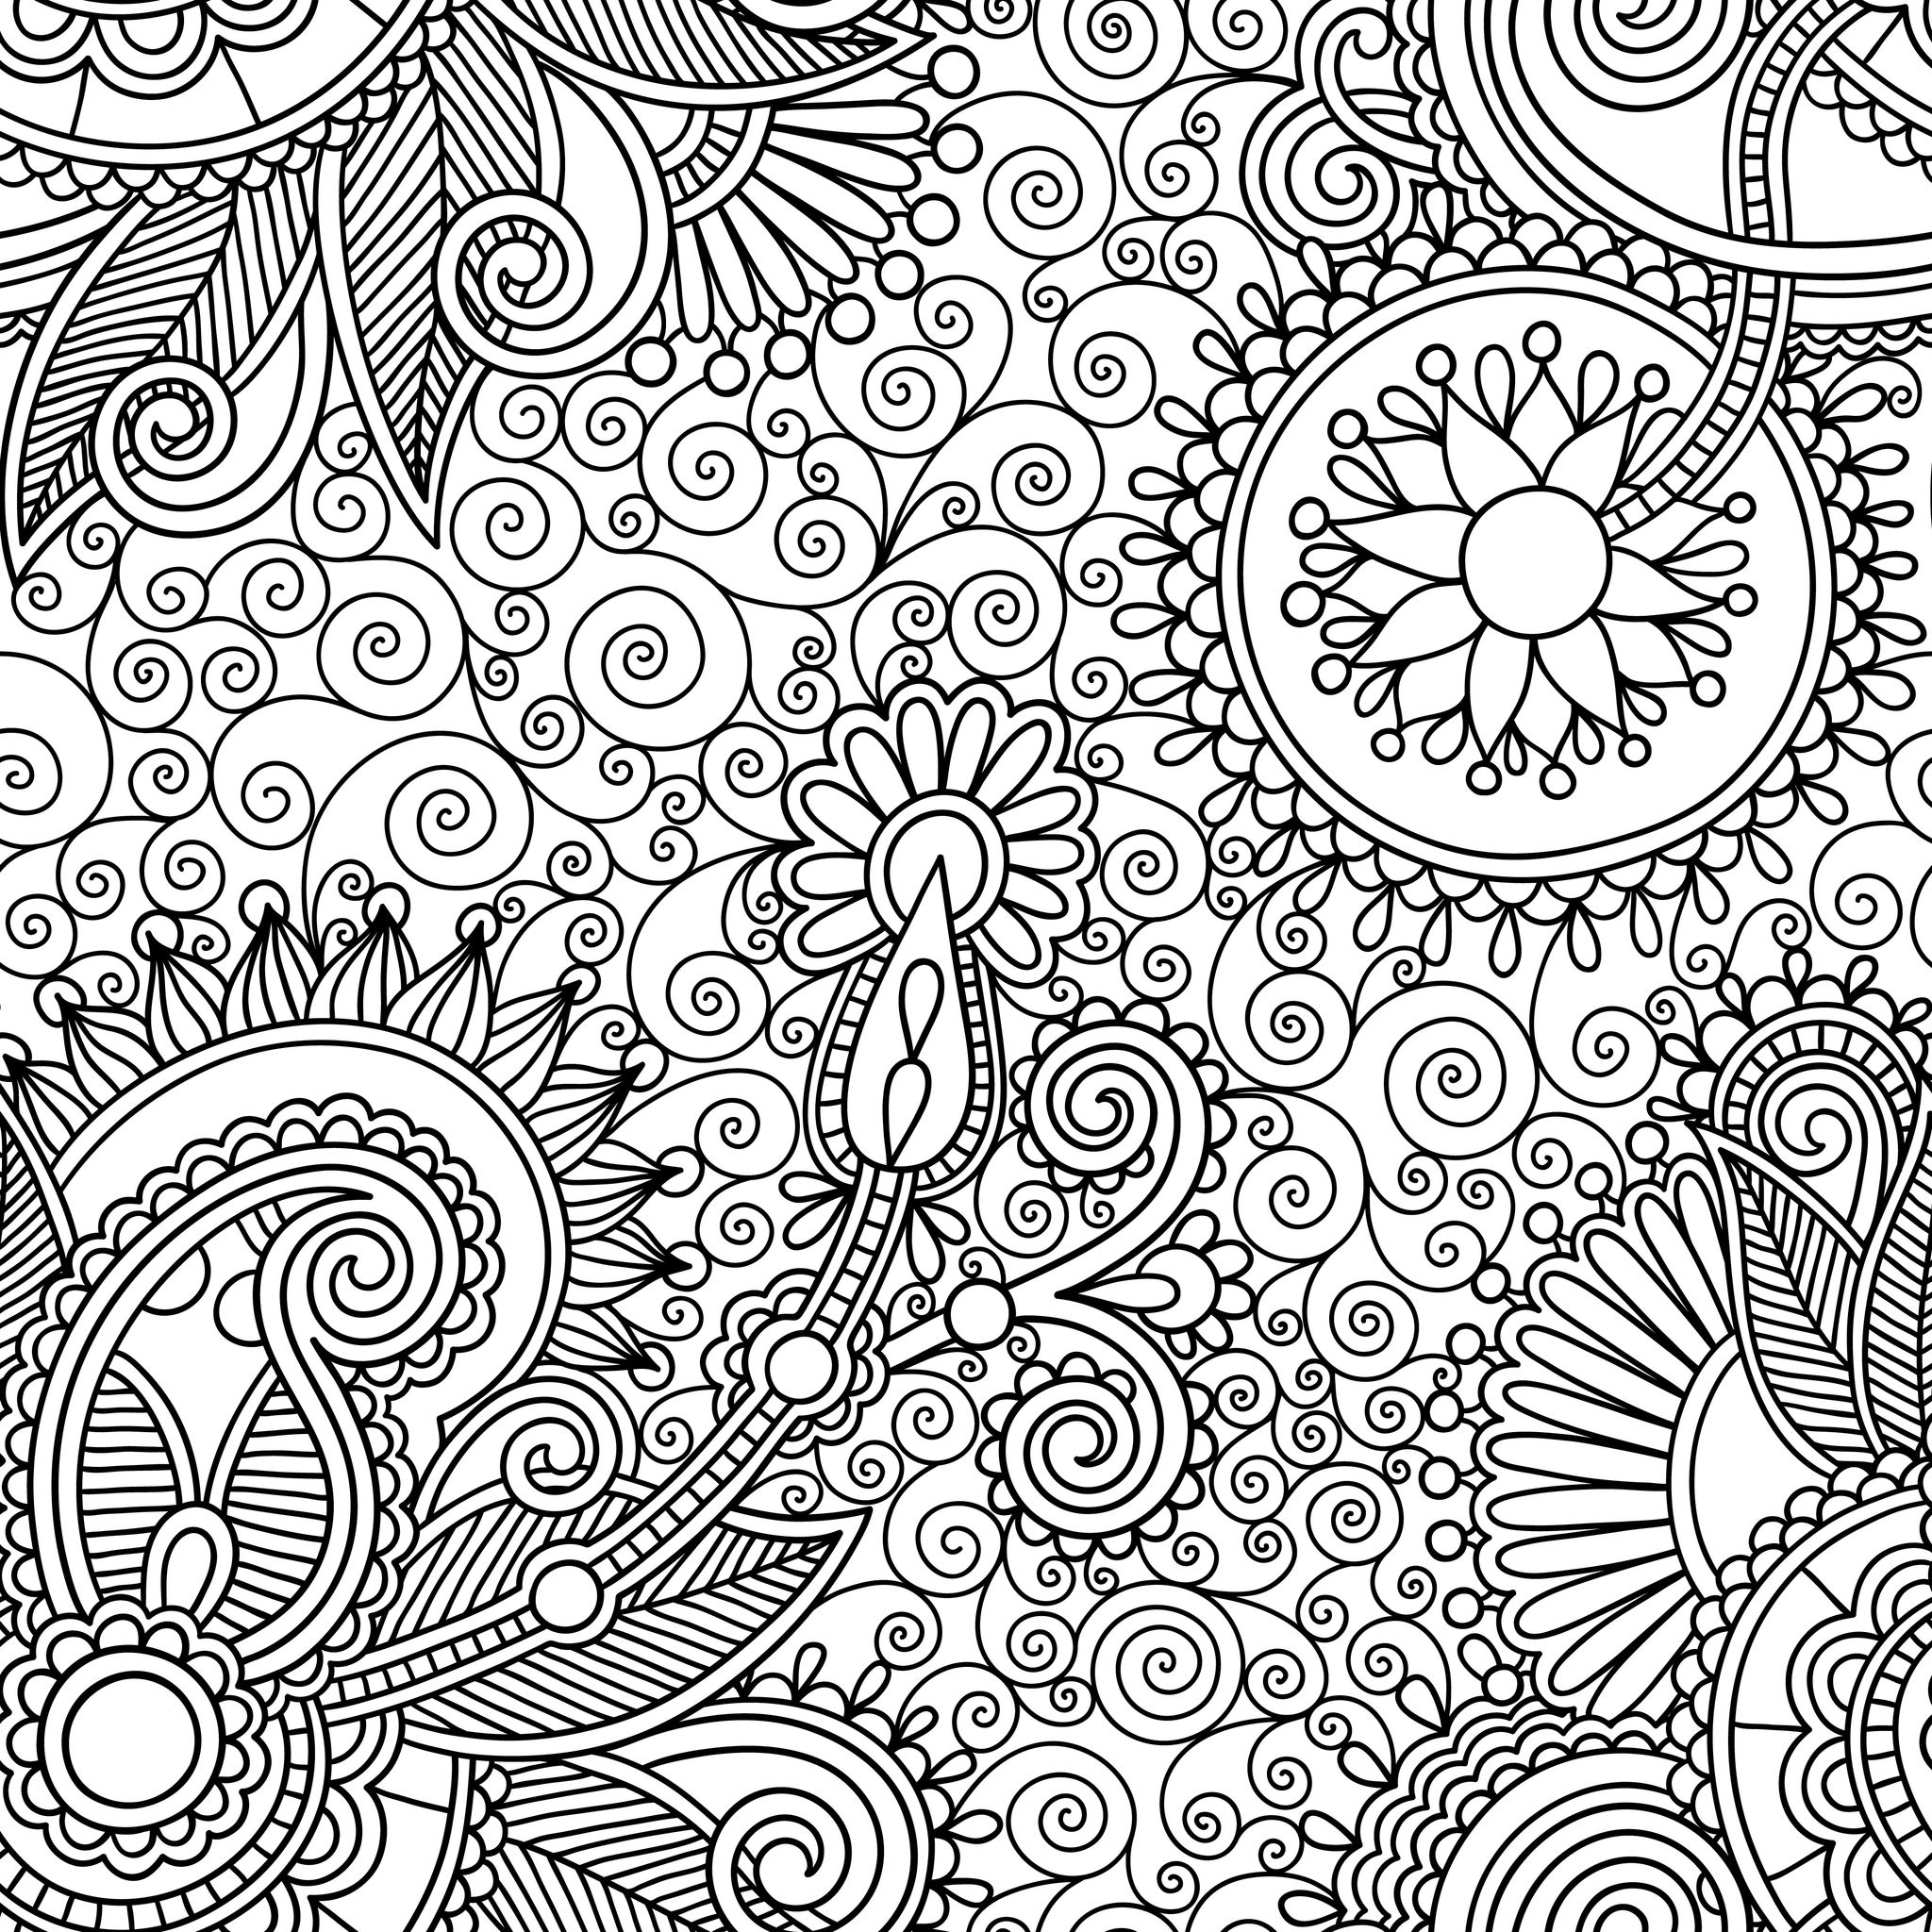 Relaxation – Printable coloring pages